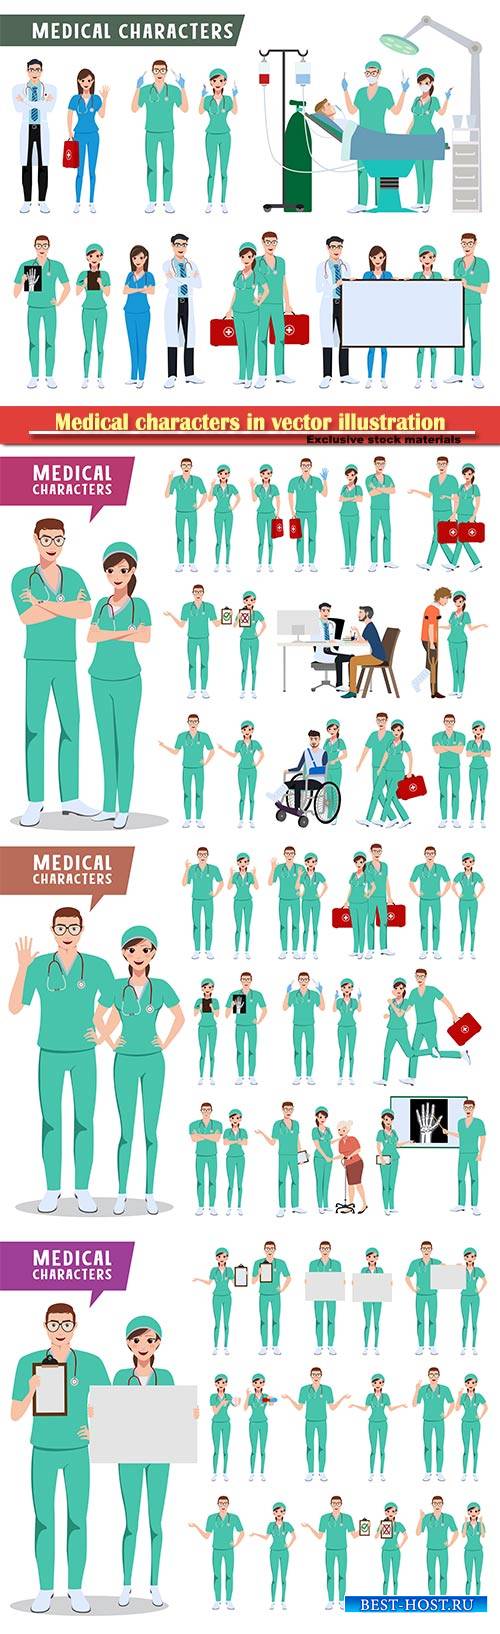 Medical characters in vector illustration